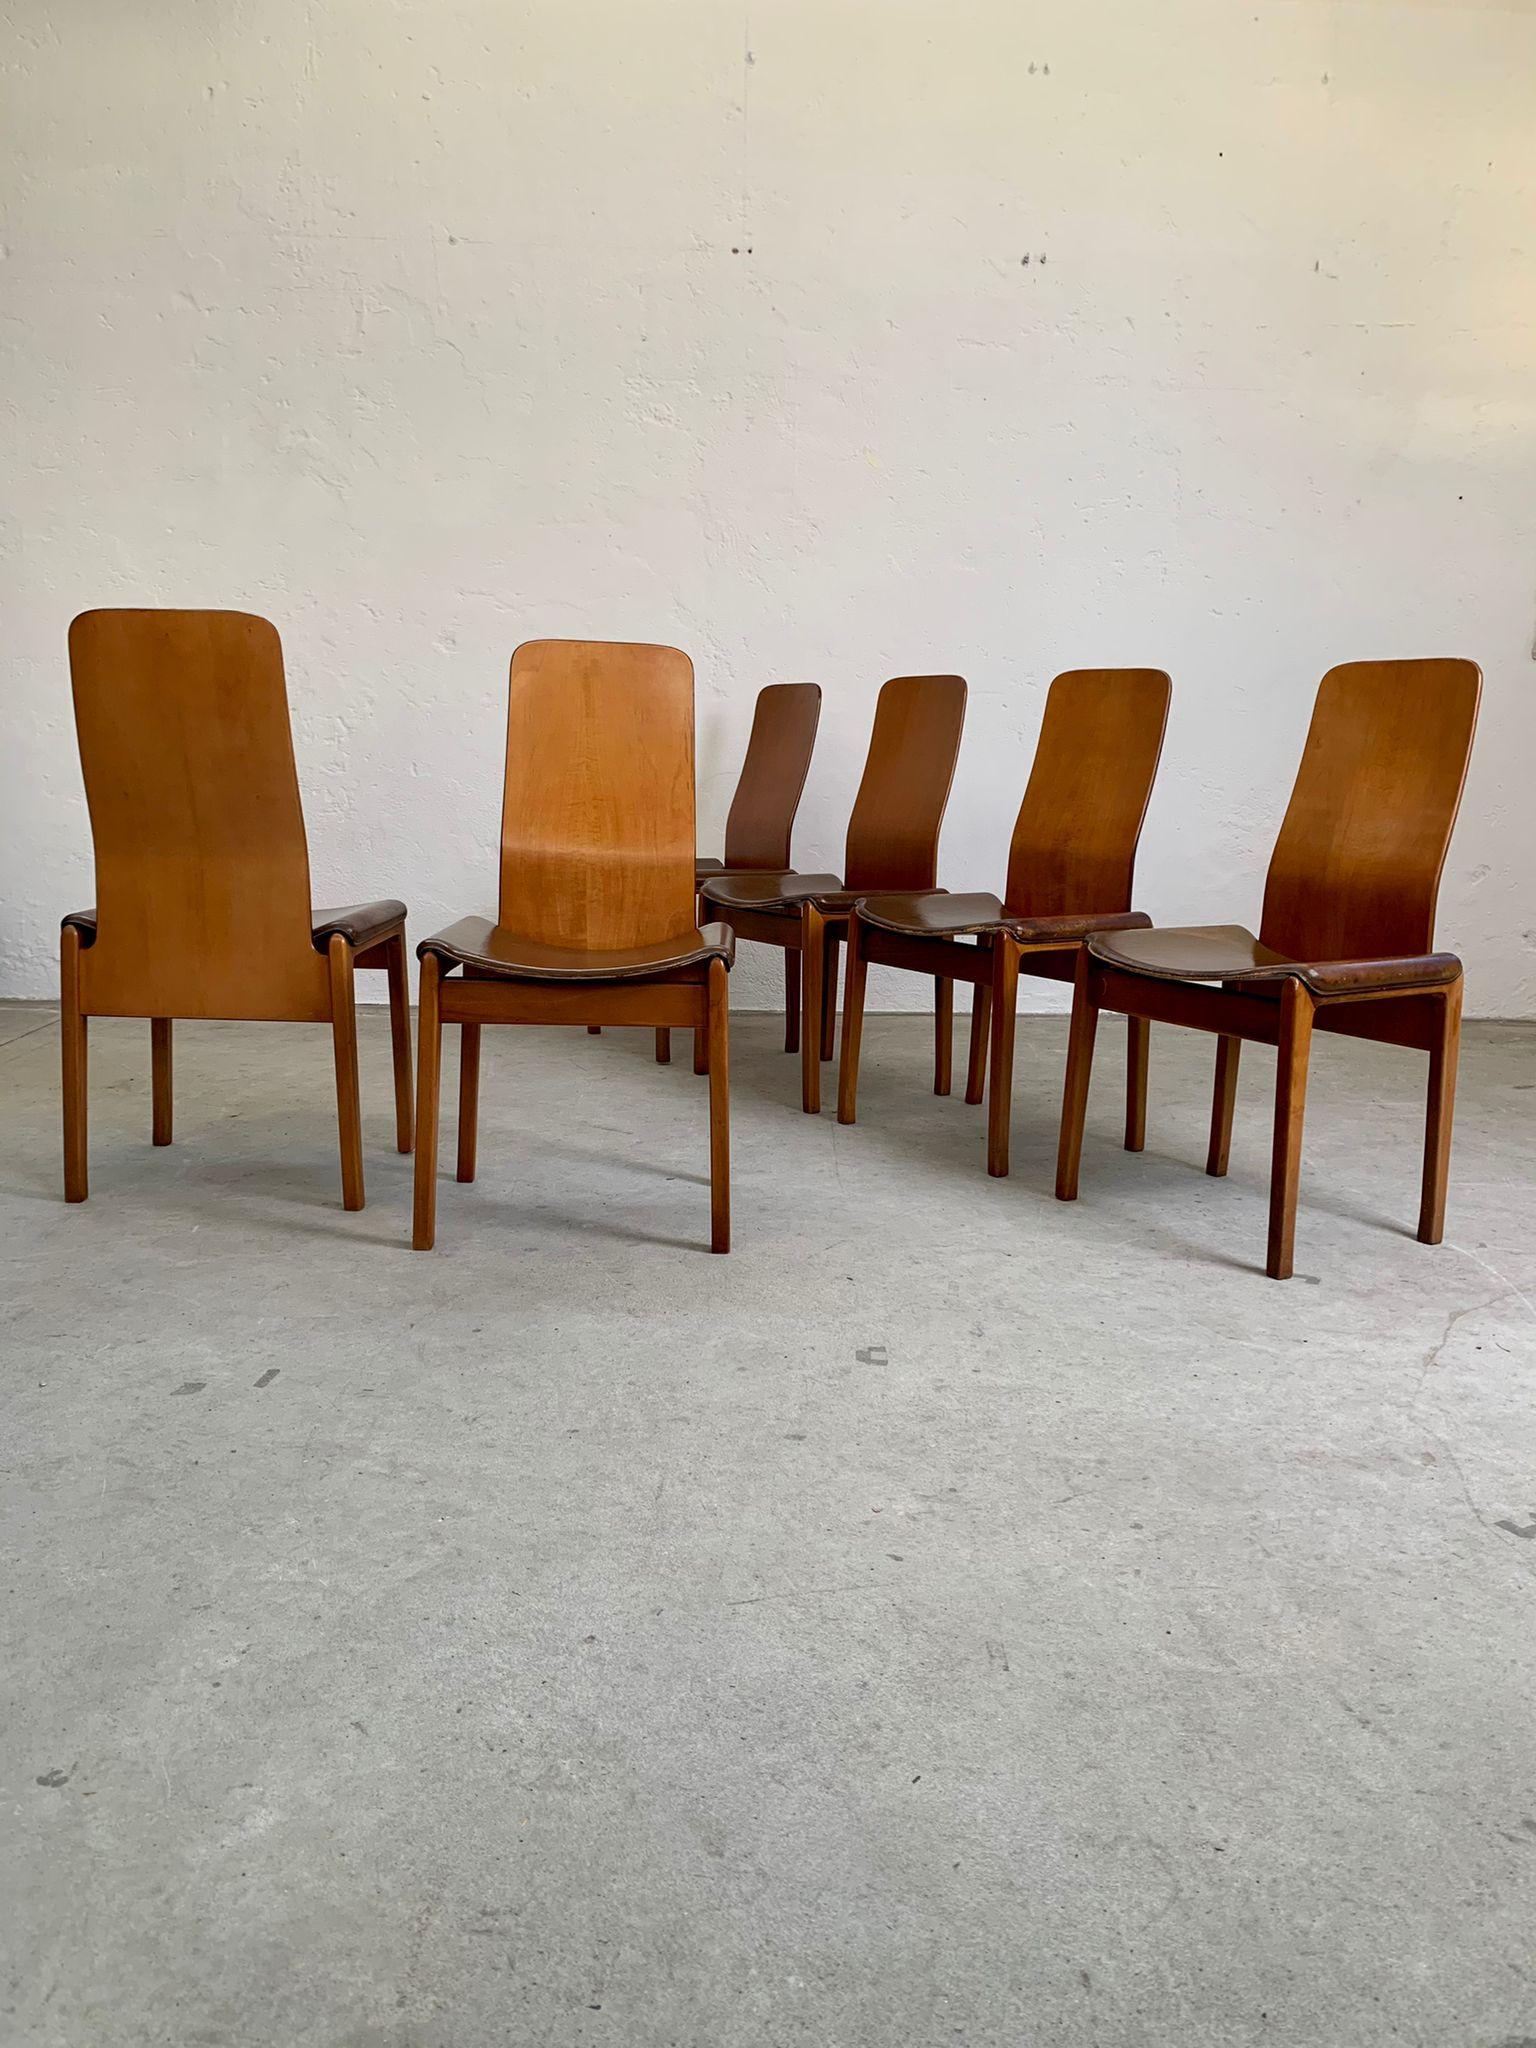 Mid-Century Modern Set of Fiorenza chairs in wood and leather by Tito Agnoli for Molteni, 1968